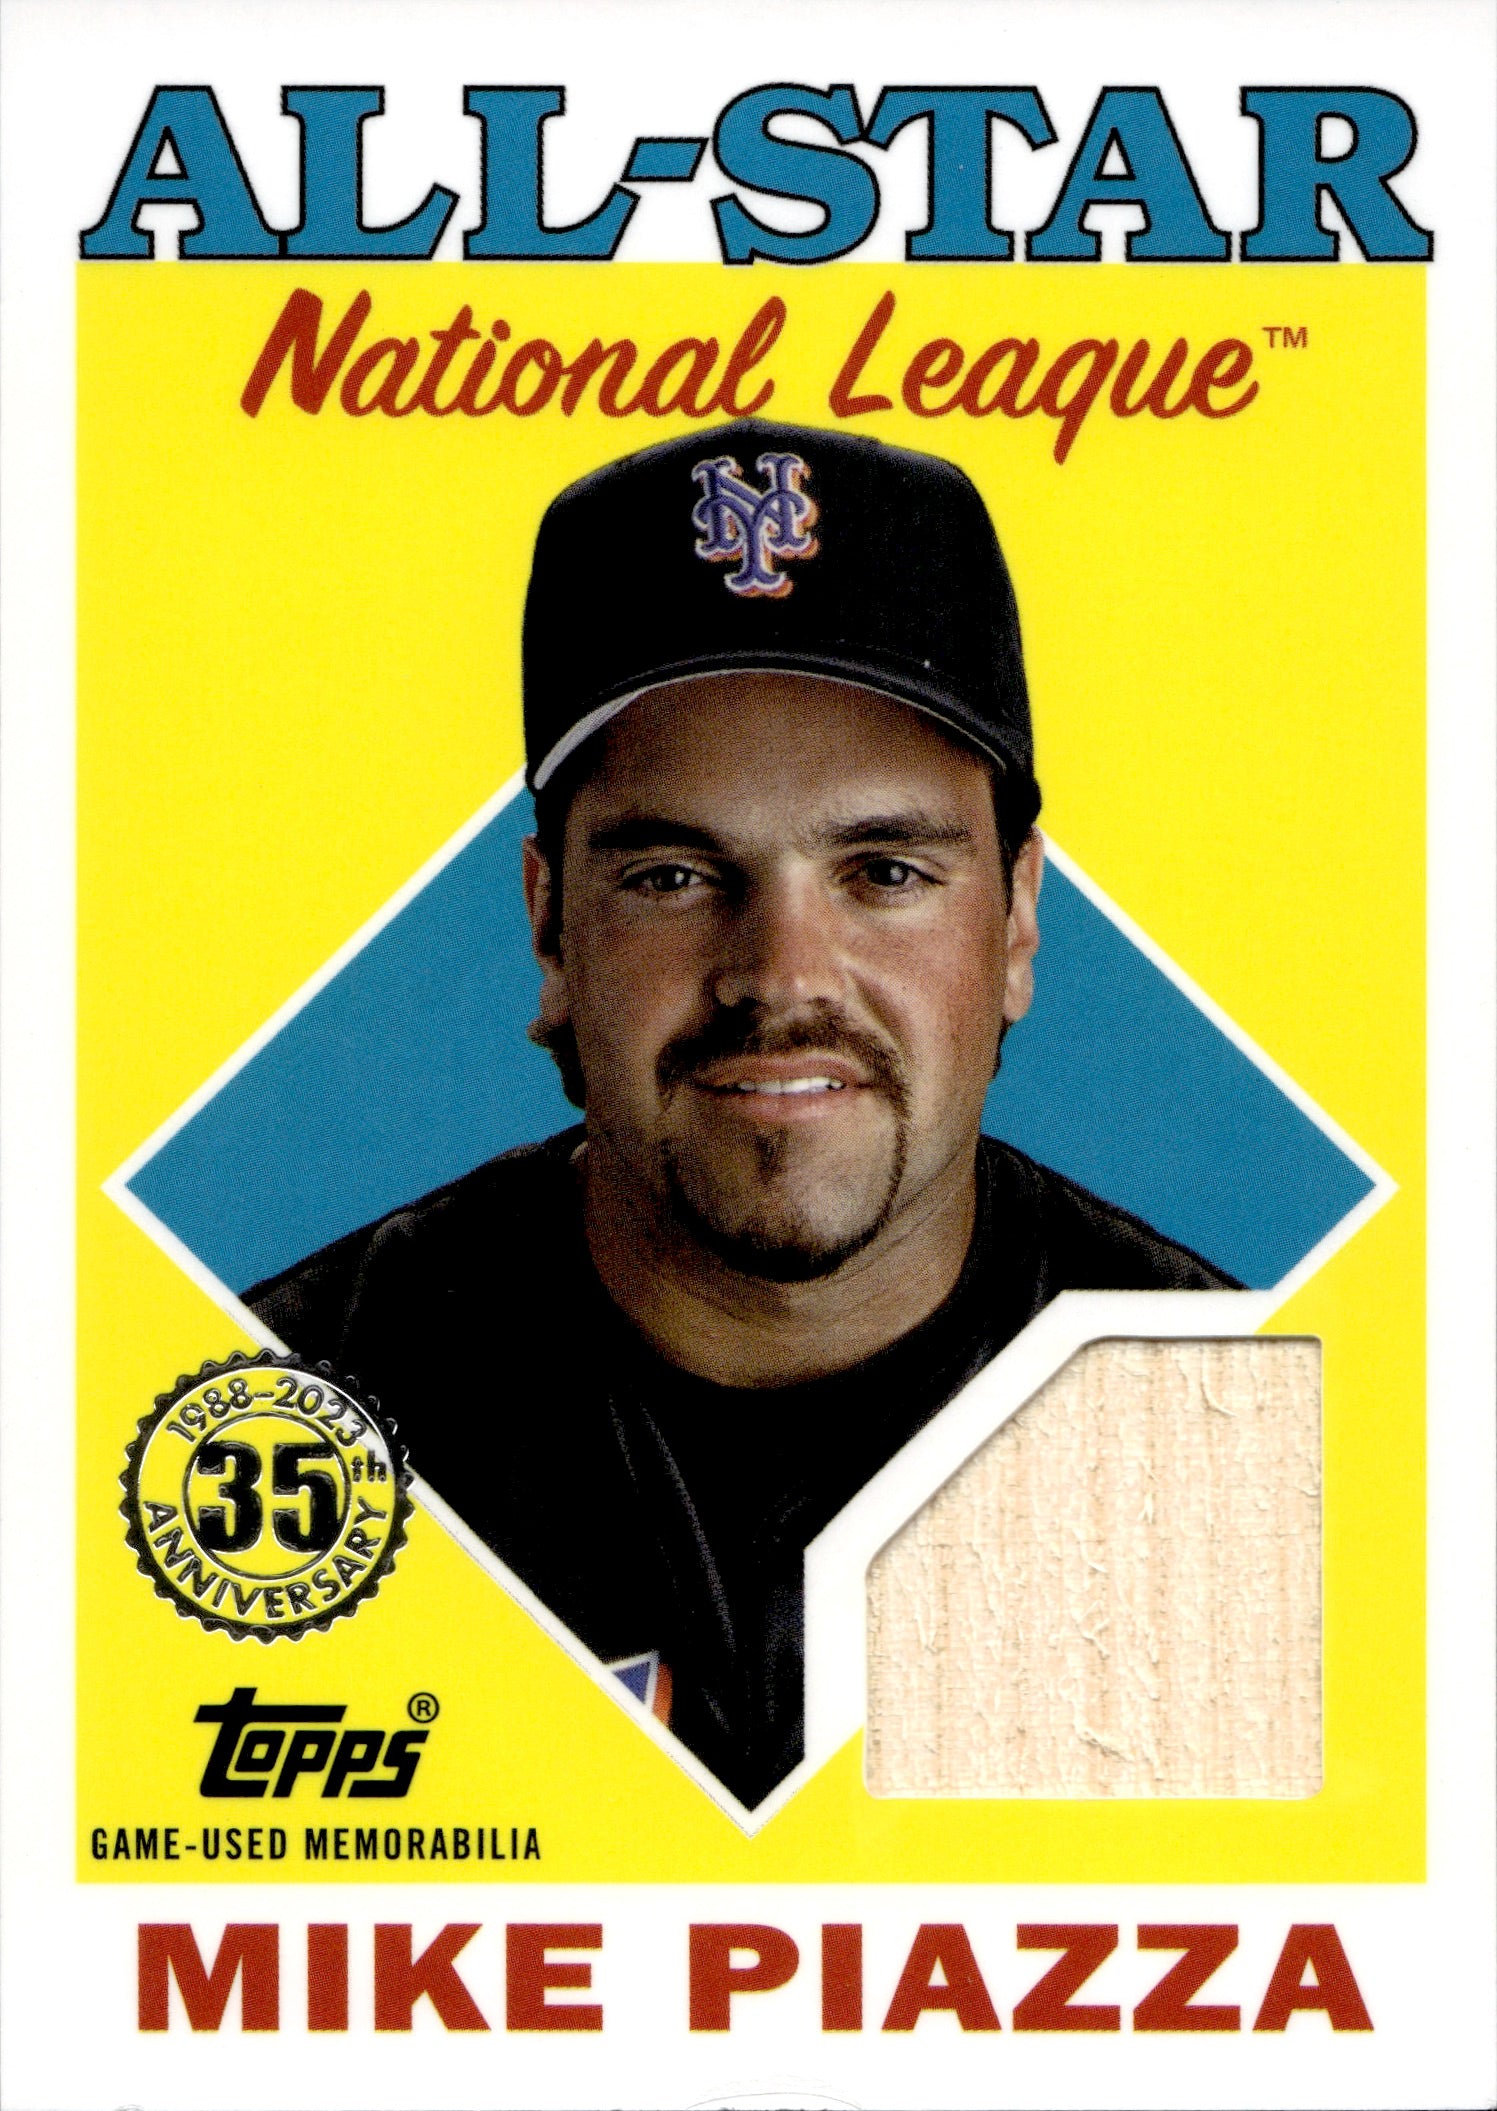 2023 Mike Piazza Topps Series 2 ALL-STAR 1988 DESIGN BAT RELIC #88ASR